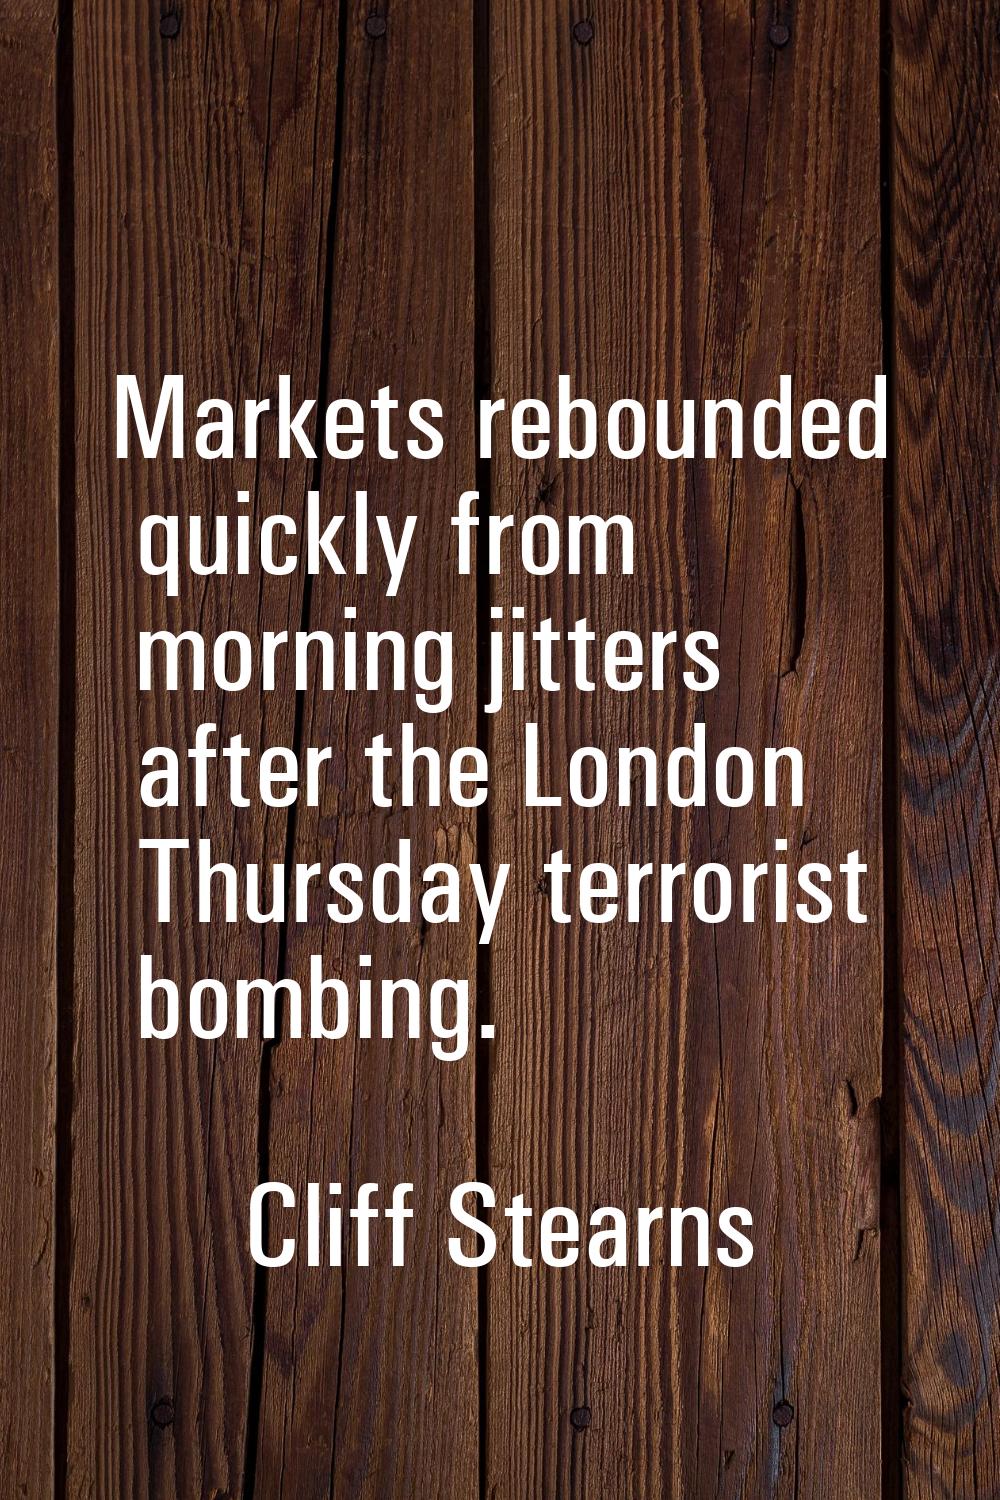 Markets rebounded quickly from morning jitters after the London Thursday terrorist bombing.